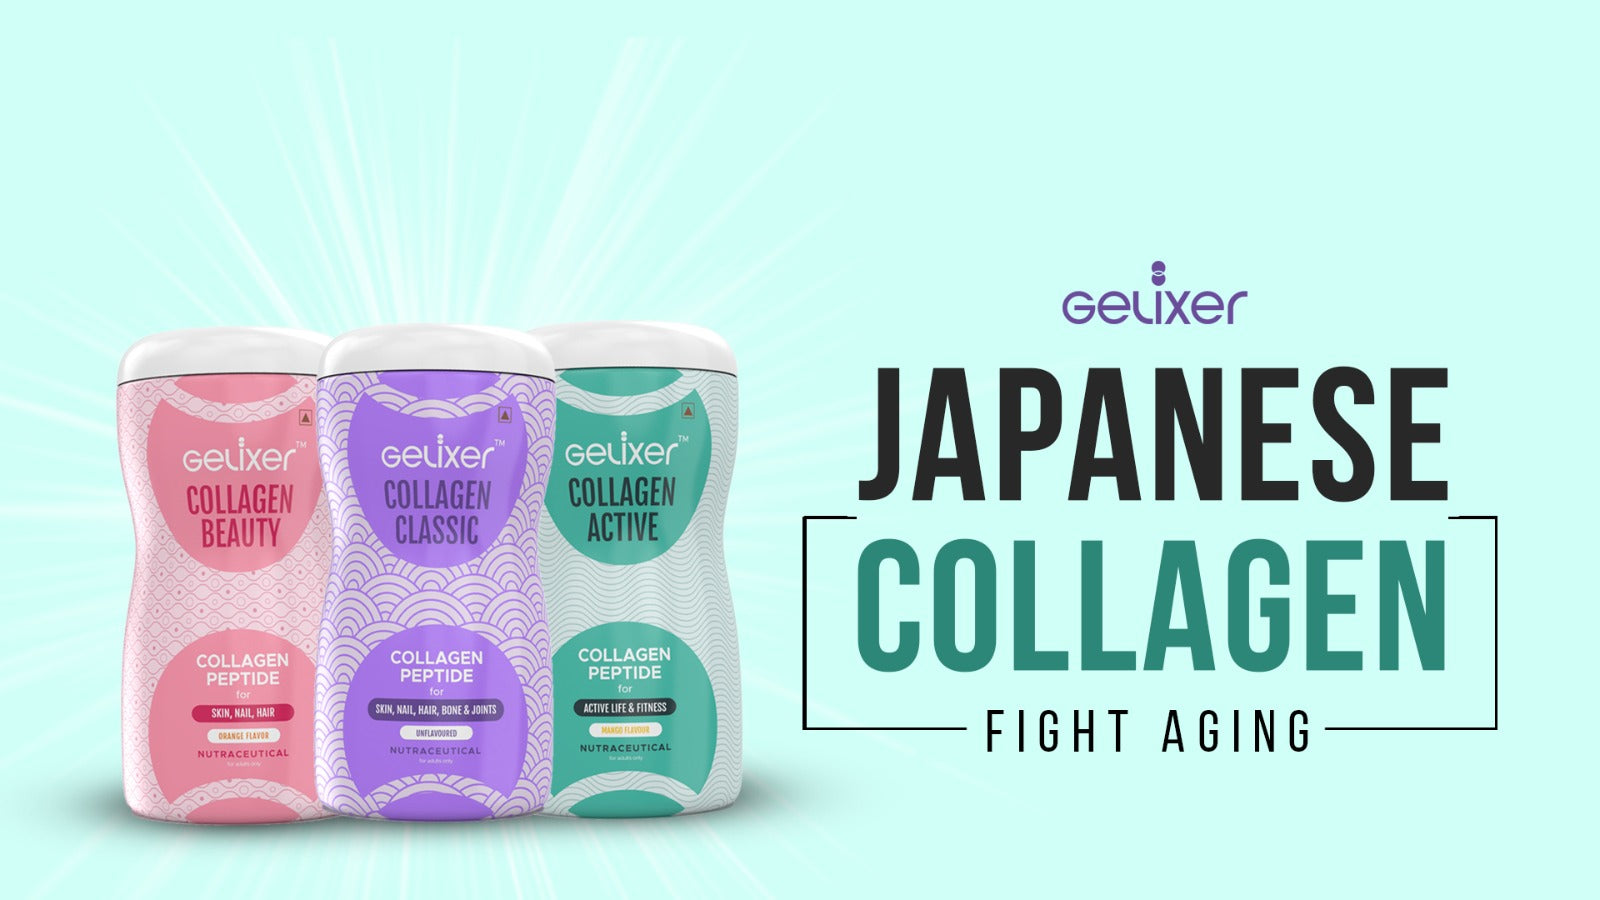 Fight Aging with Japanese Gelixer Collagen